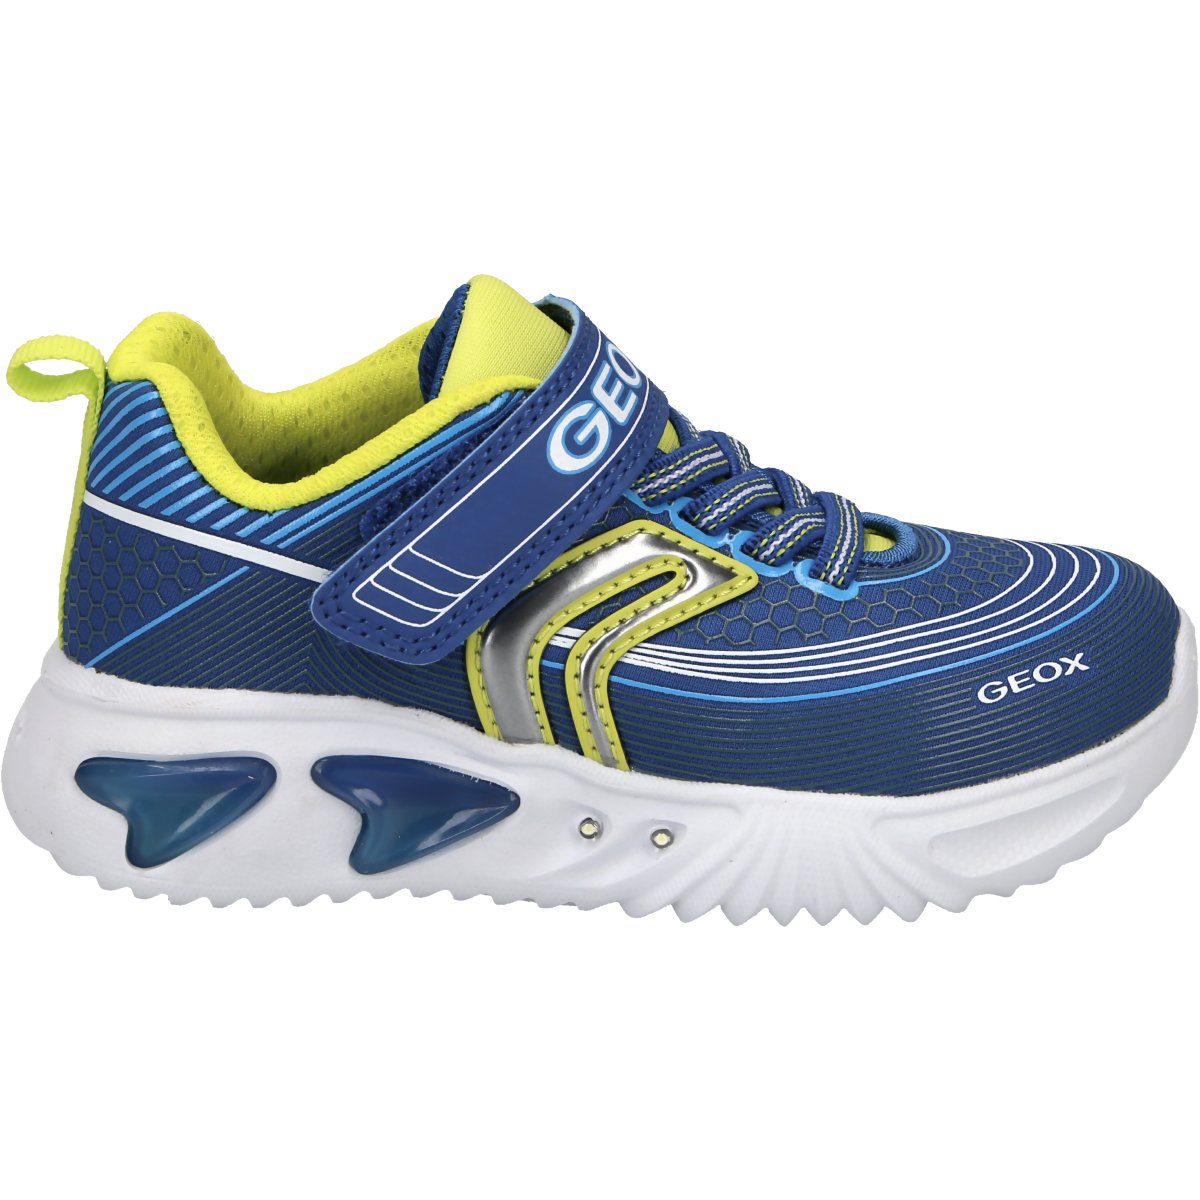 ASSISTER Sneaker Geox ROYAL/LIME